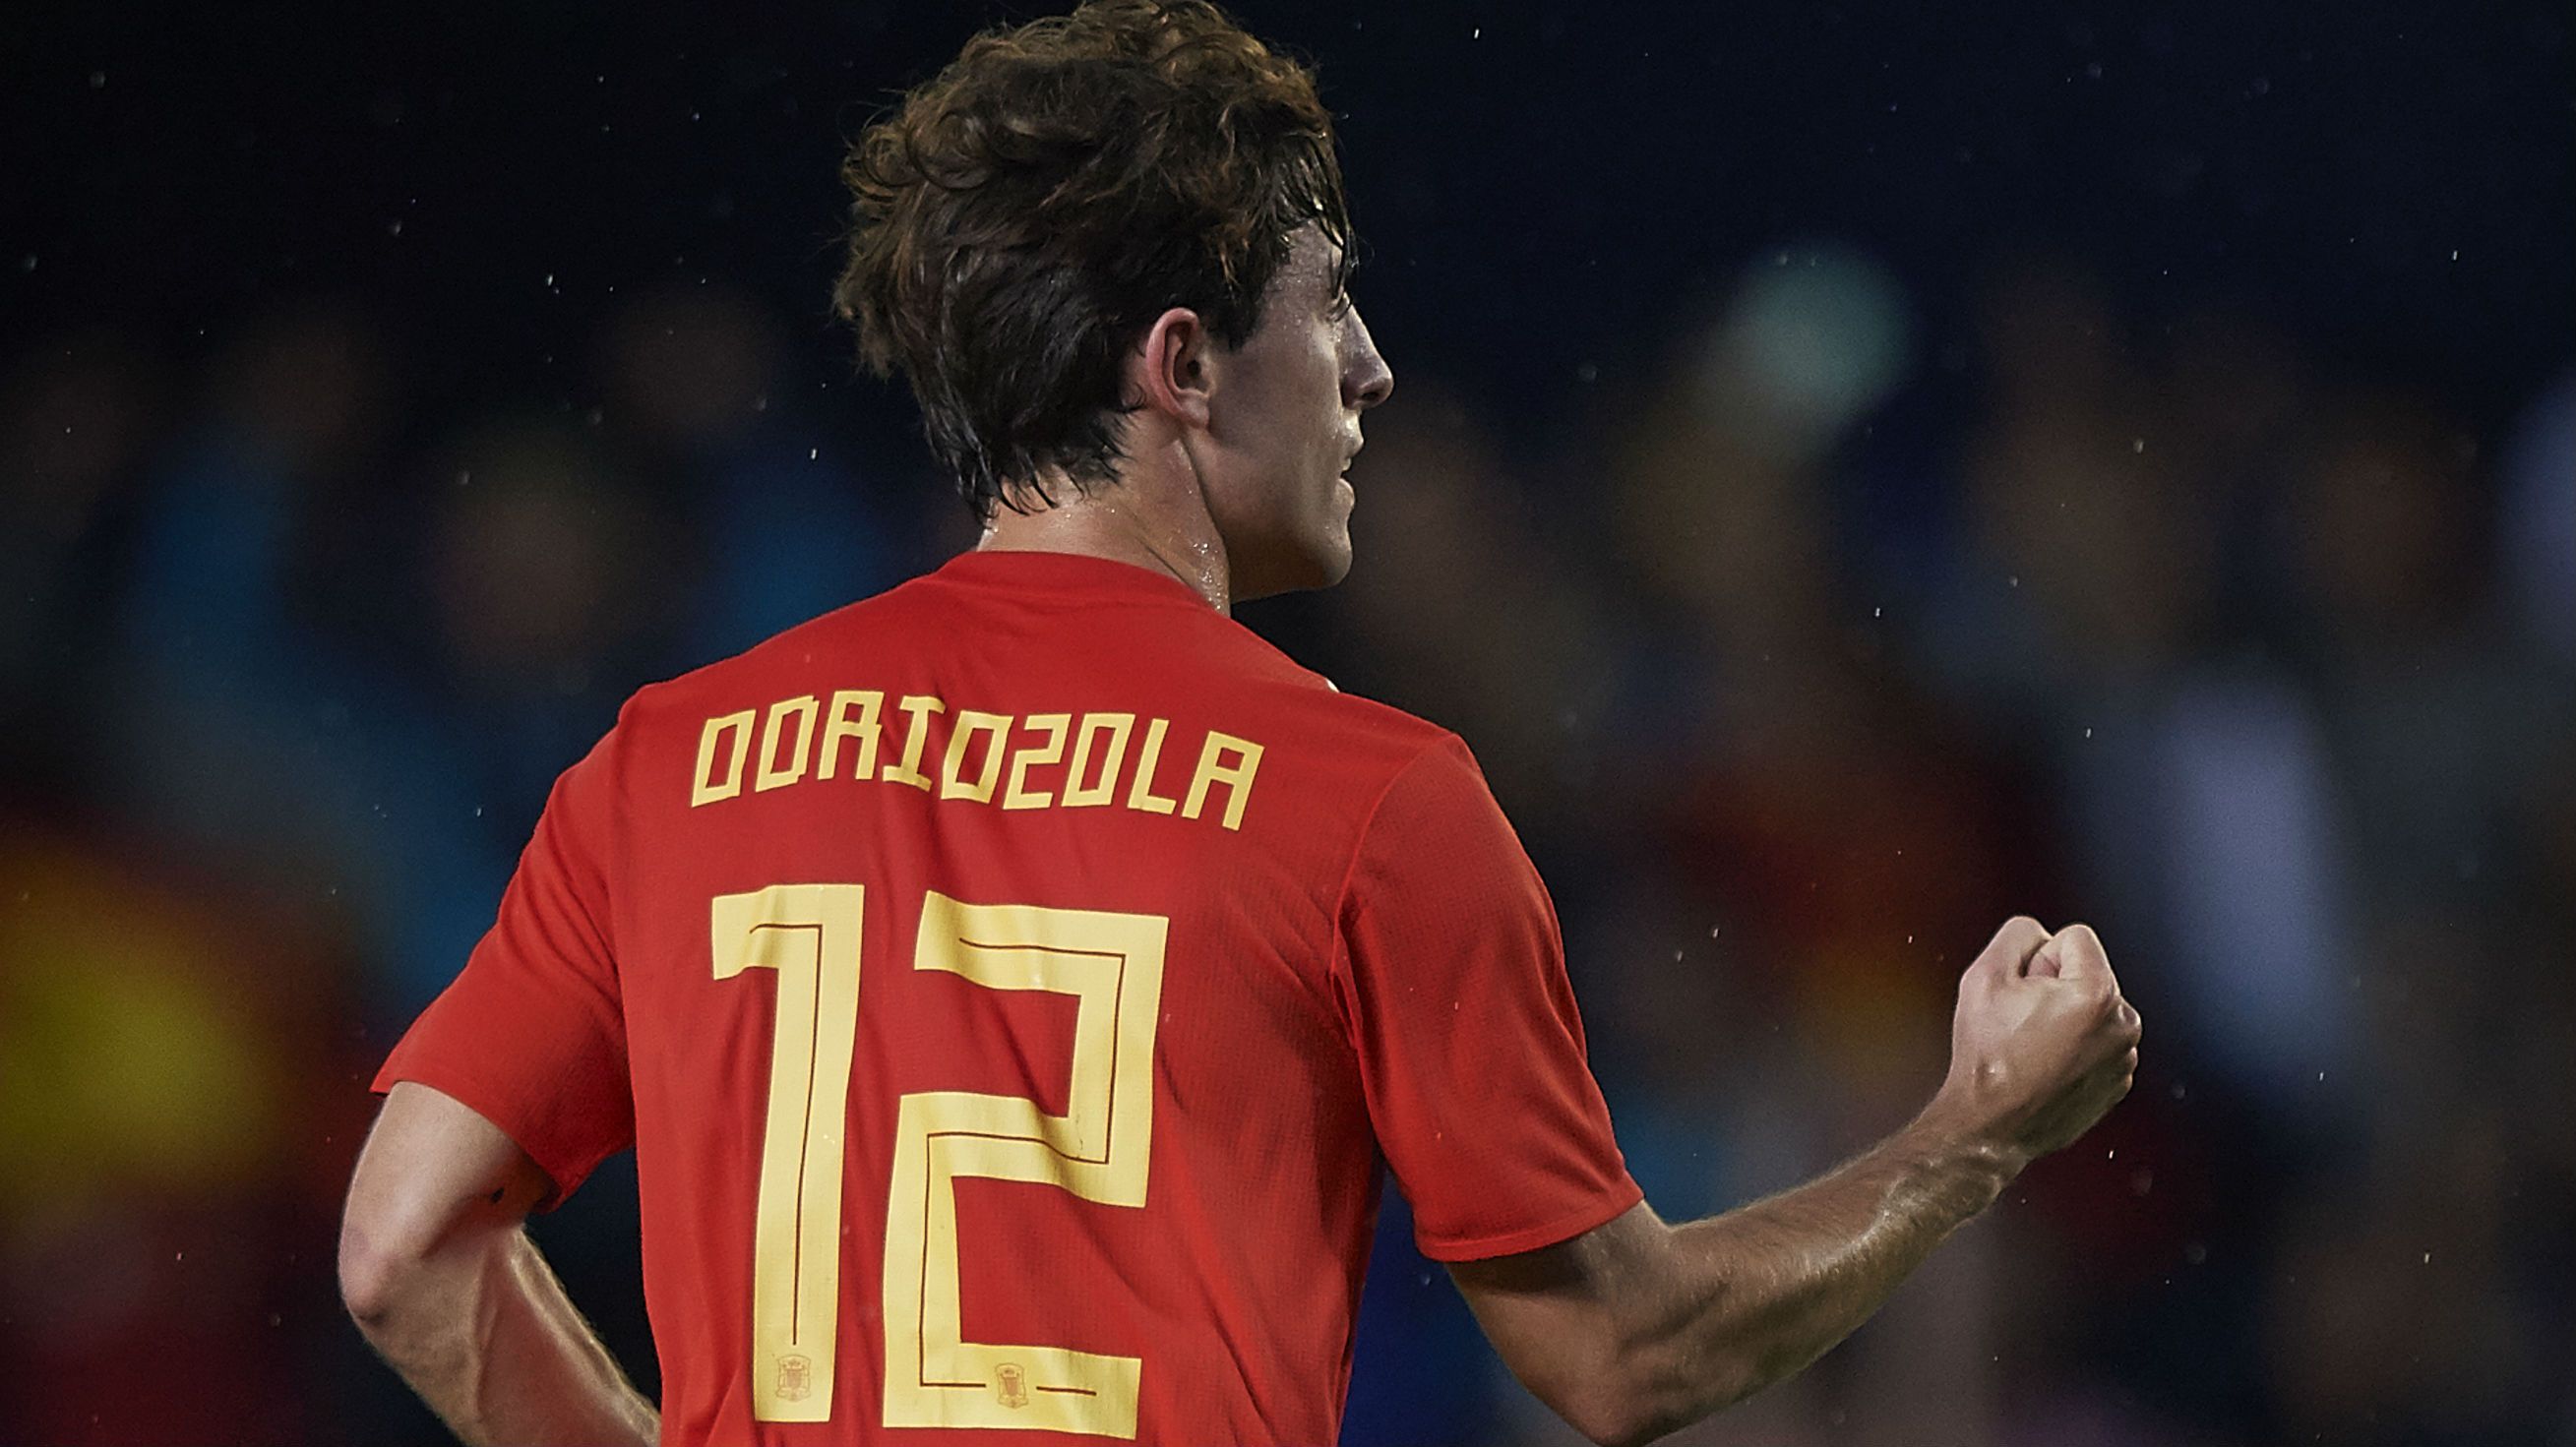 World Cup 2018: Alvaro Odriozola tells Goal that Spain are ready to do something great and deliver on expectations